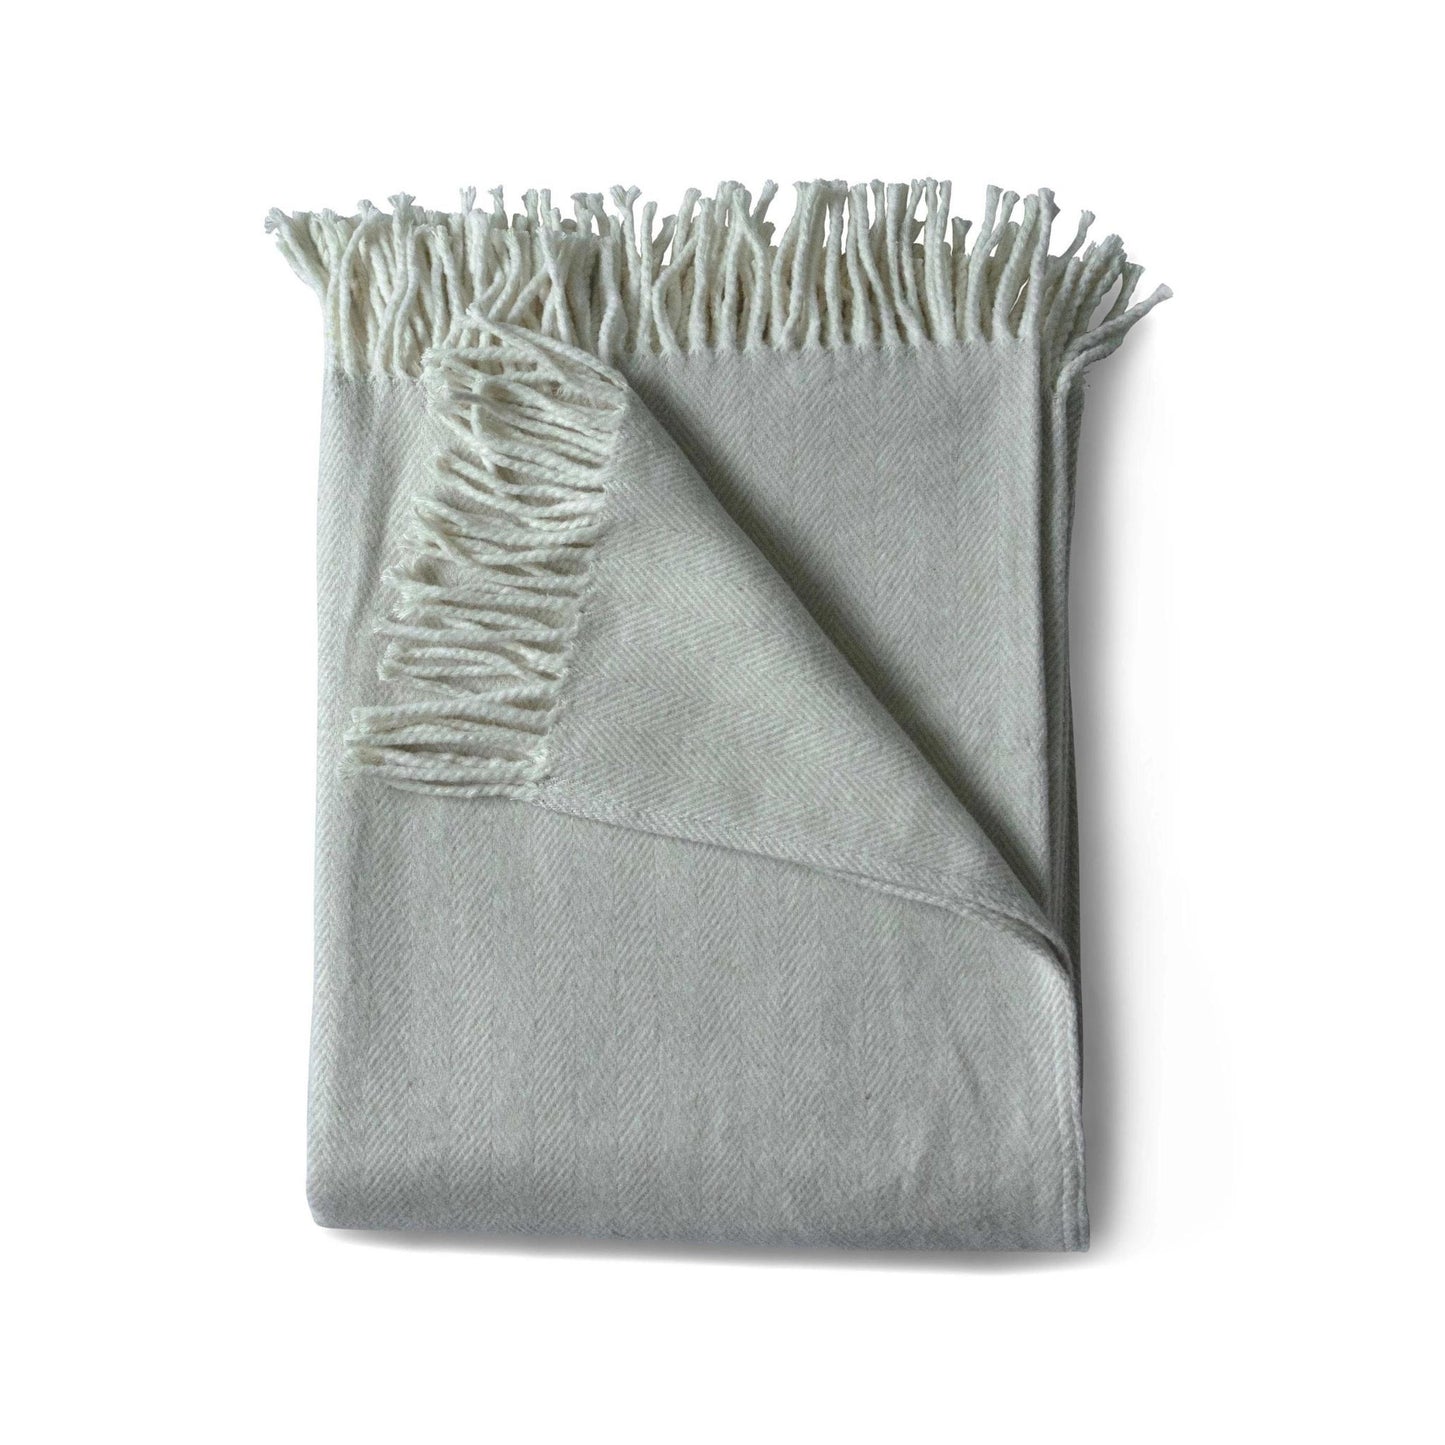 Brushed cotton throw blanket in oyster gray herringbone pattern with cotton fringe